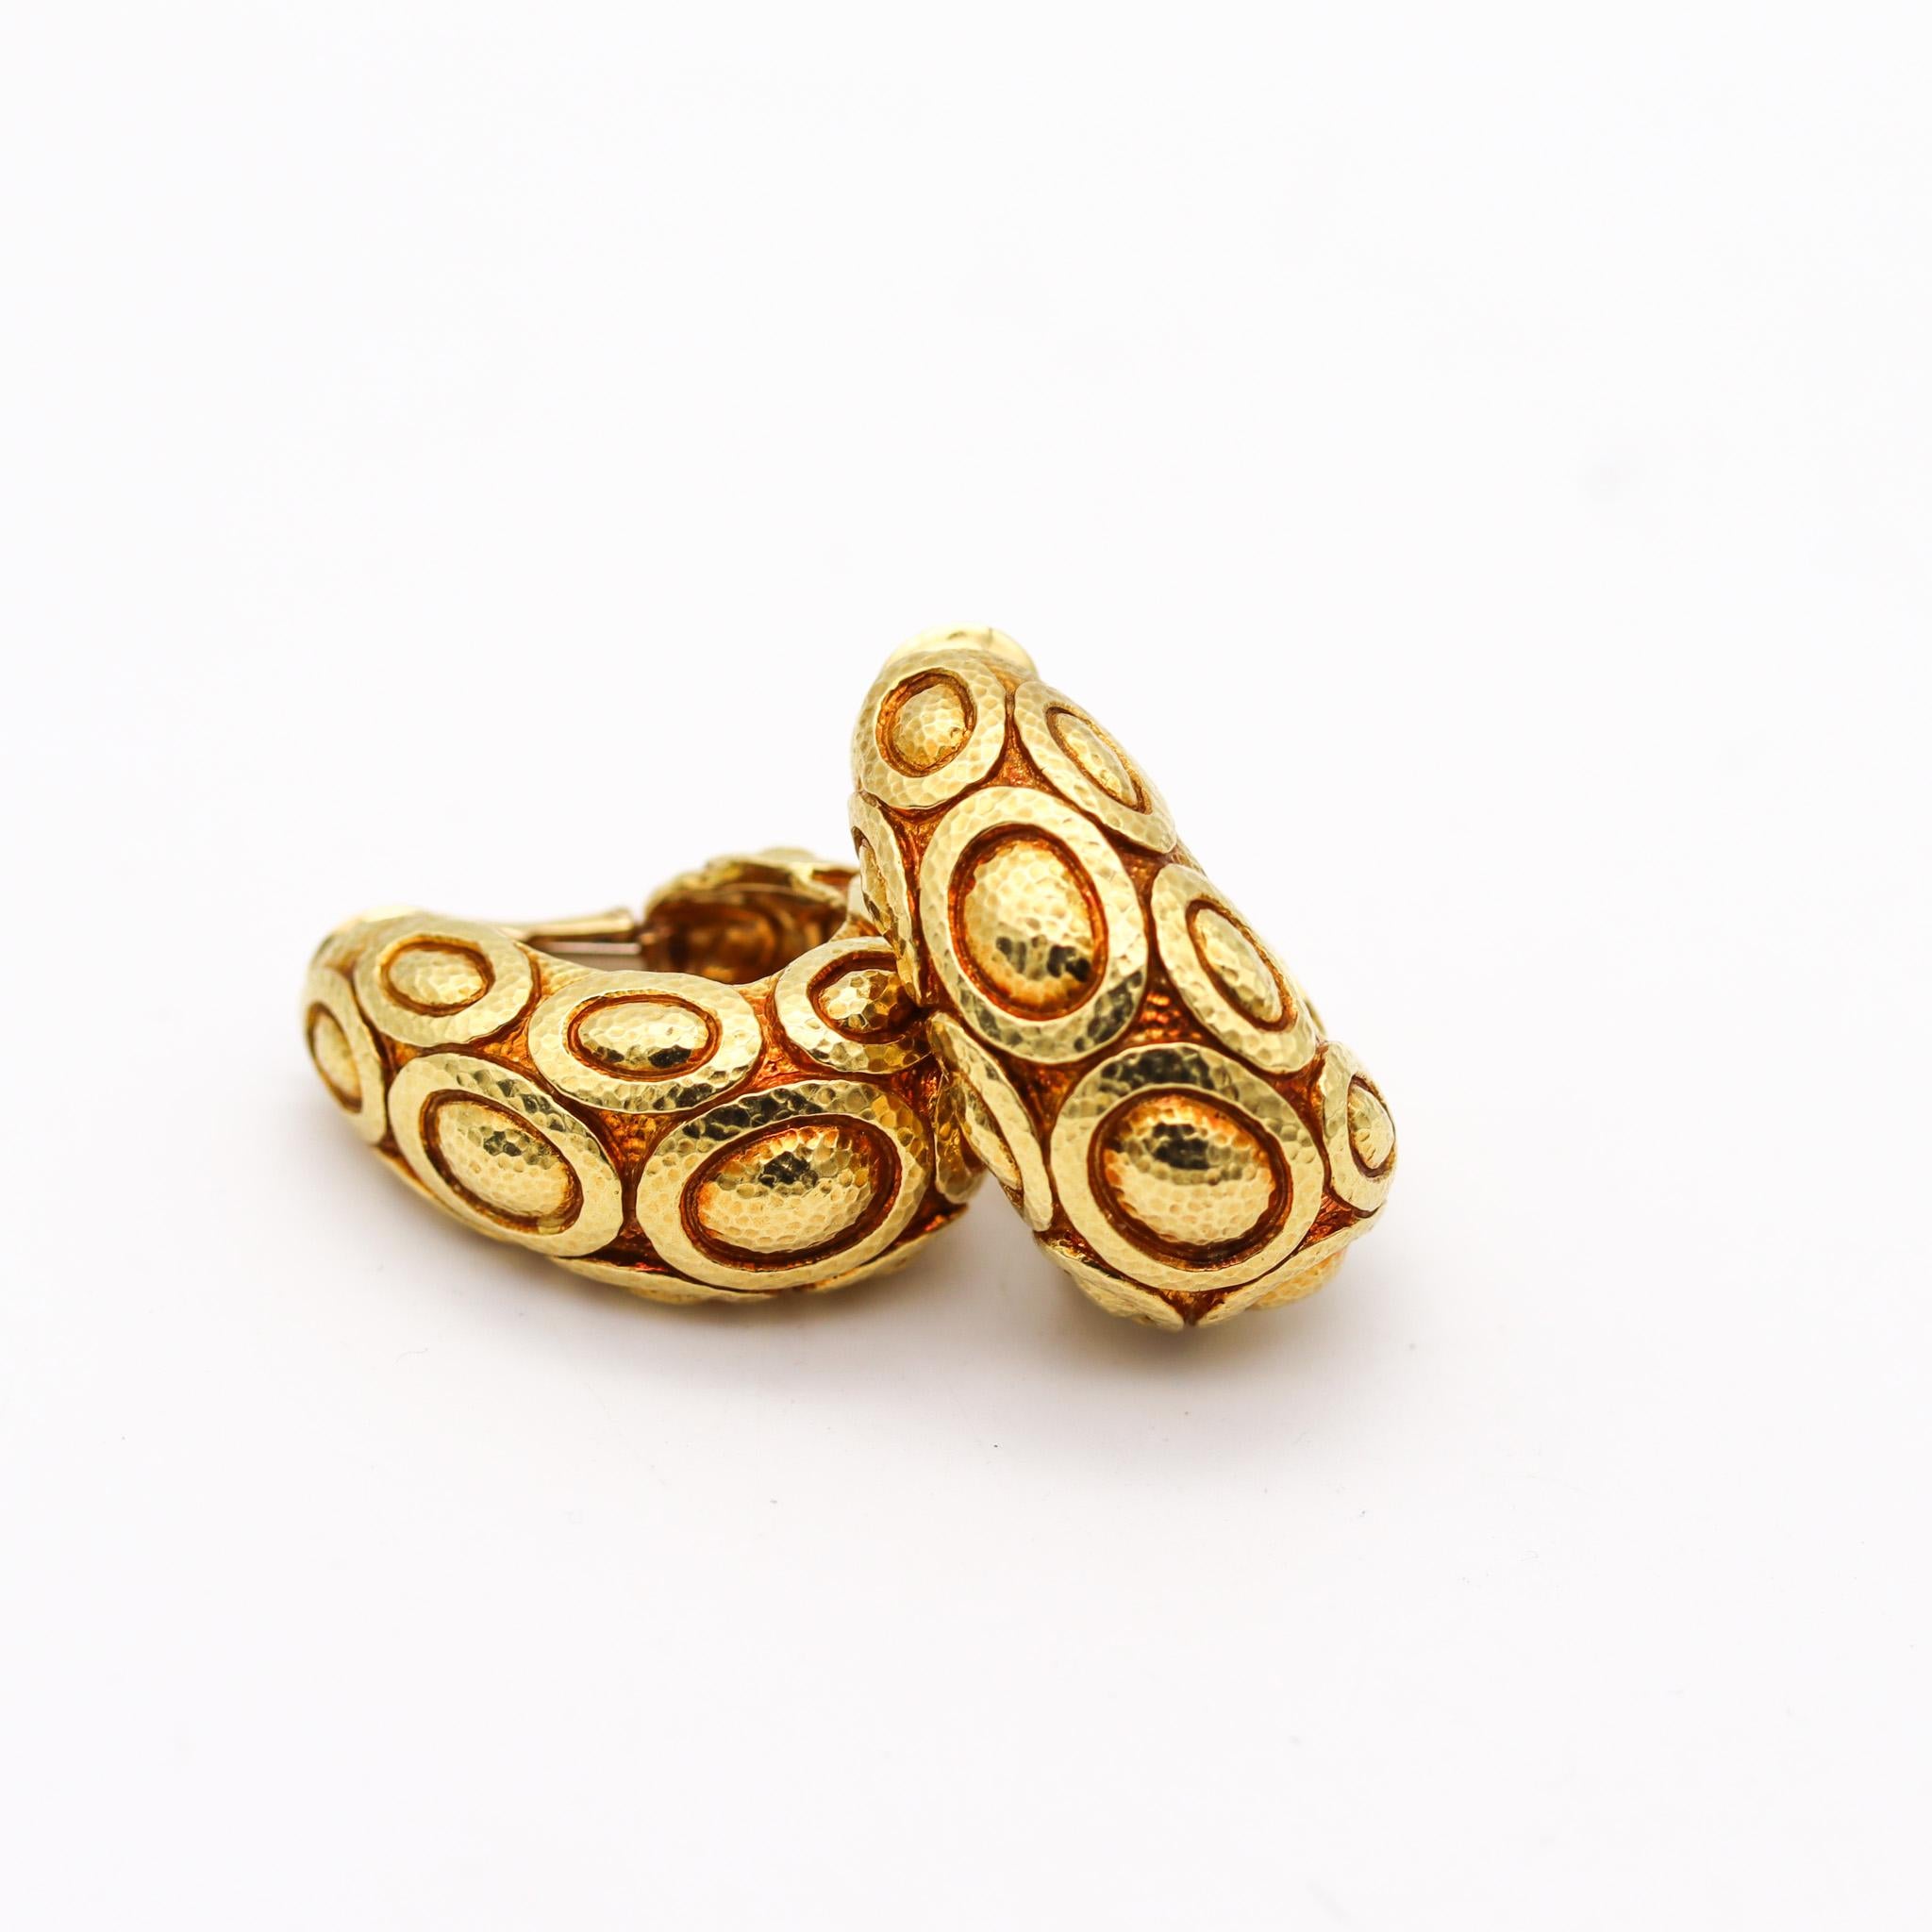 Clips-on earrings designed by David Webb (1925-1975).

Exceptional and magnificent pair of hoop clips earrings, created in New York city at the jewelry atelier of David Webb, back in the 1976. Designed with oval patterned chased gold and described